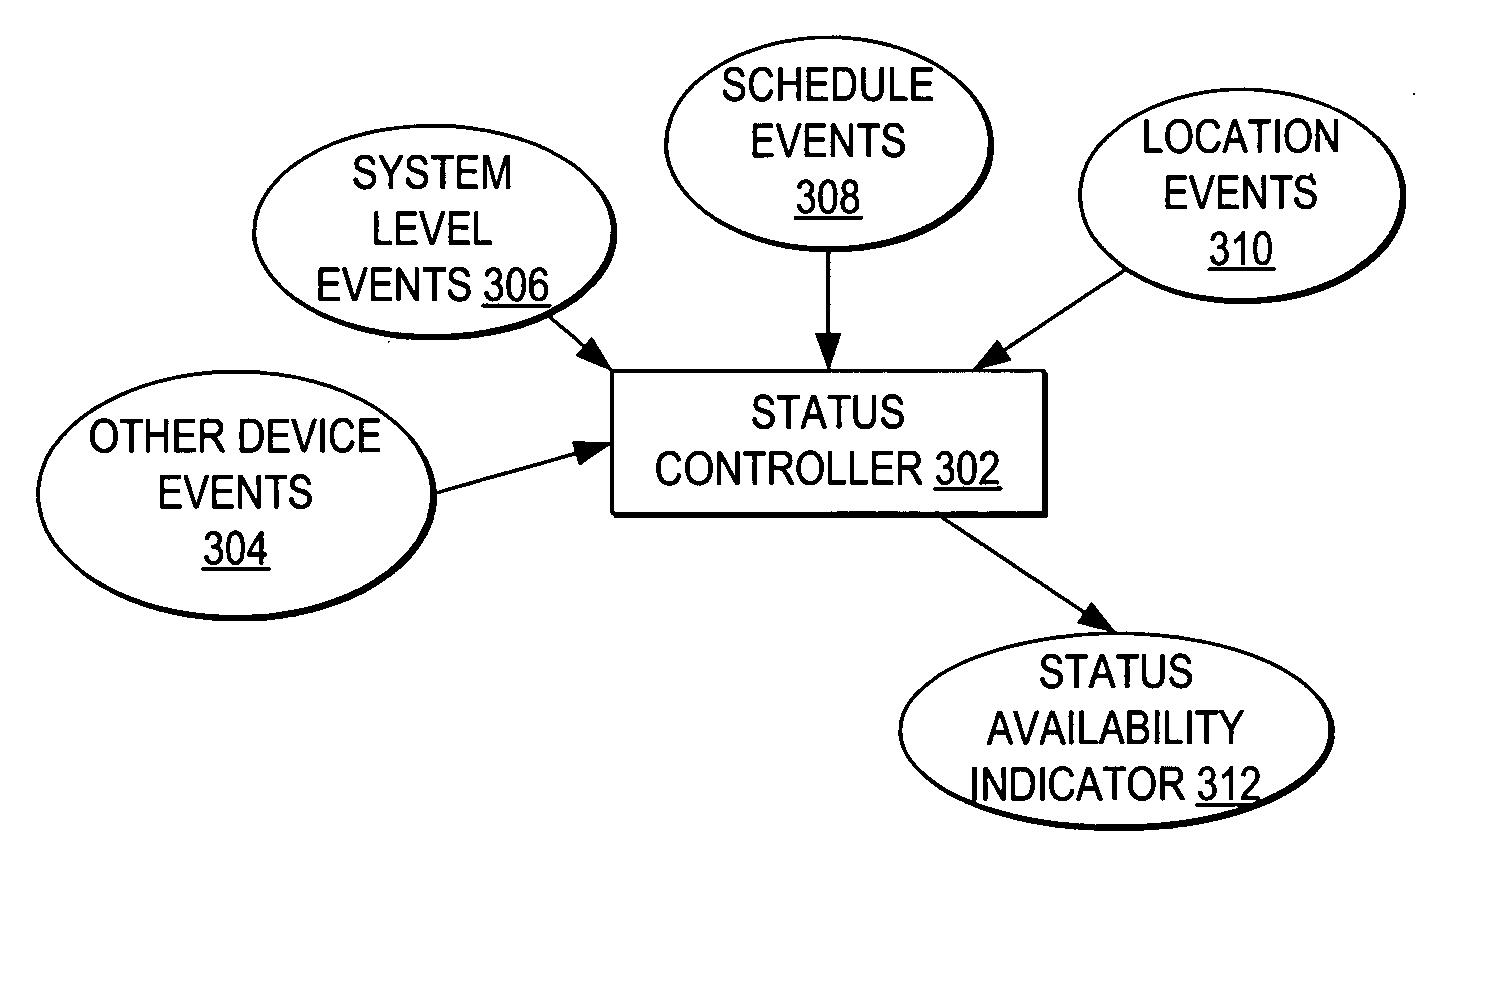 Automatically infering and updating an availability status of a user